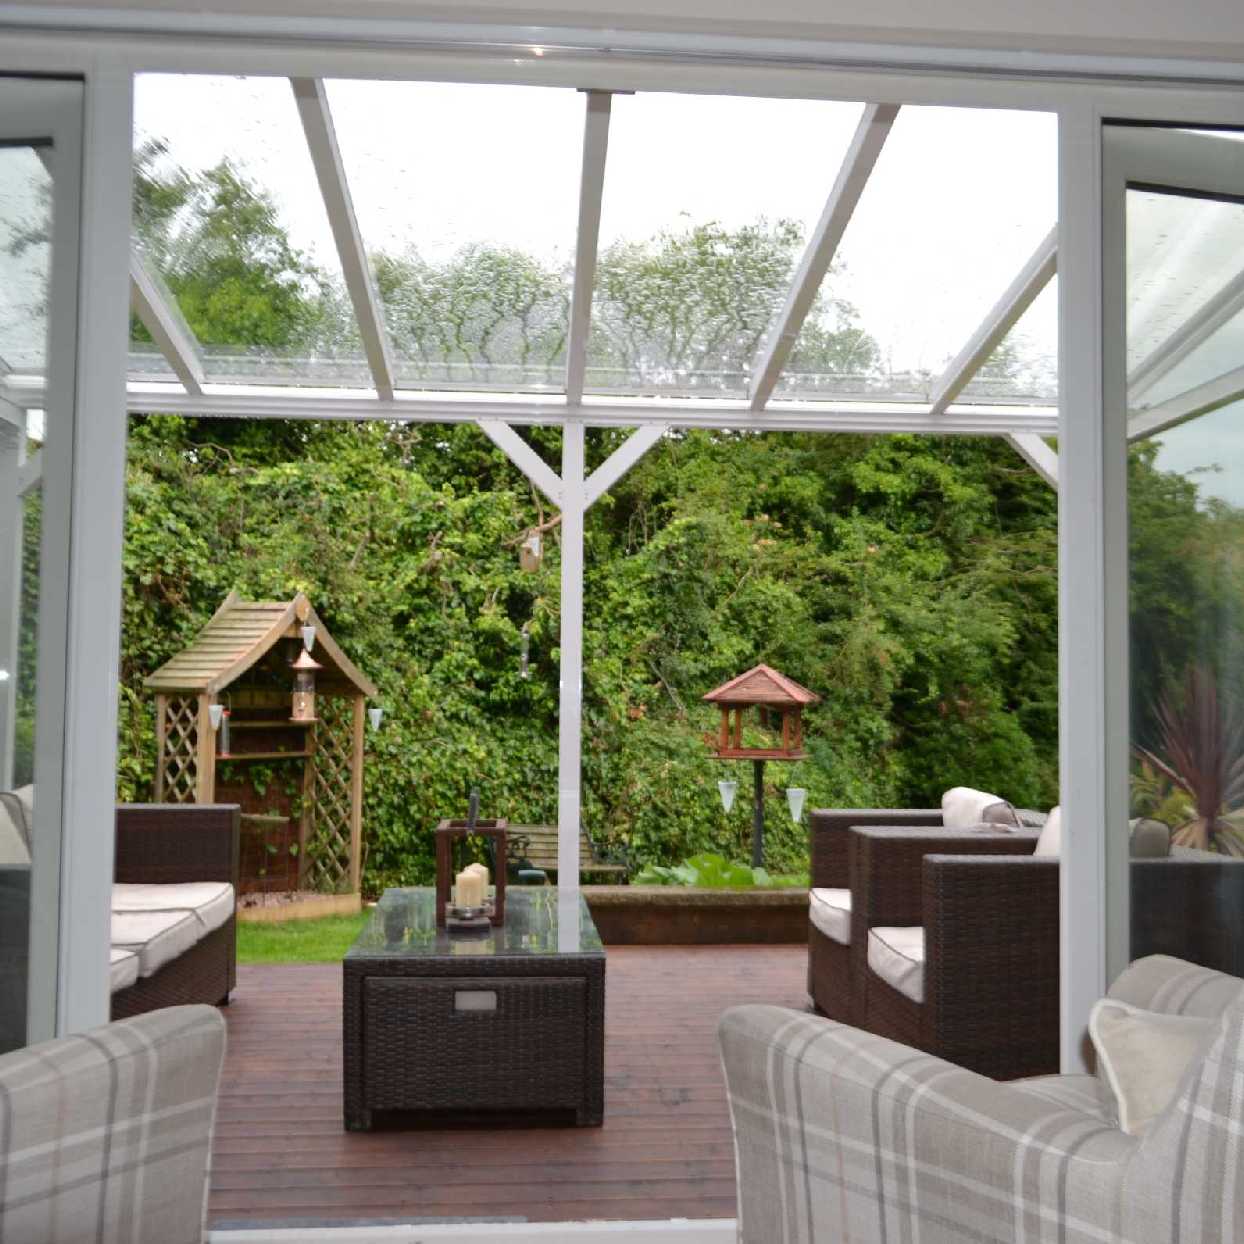 Great selection of Omega Smart Lean-To Canopy, White UNGLAZED for 6mm Glazing - 5.6m (W) x 2.0m (P), (3) Supporting Posts